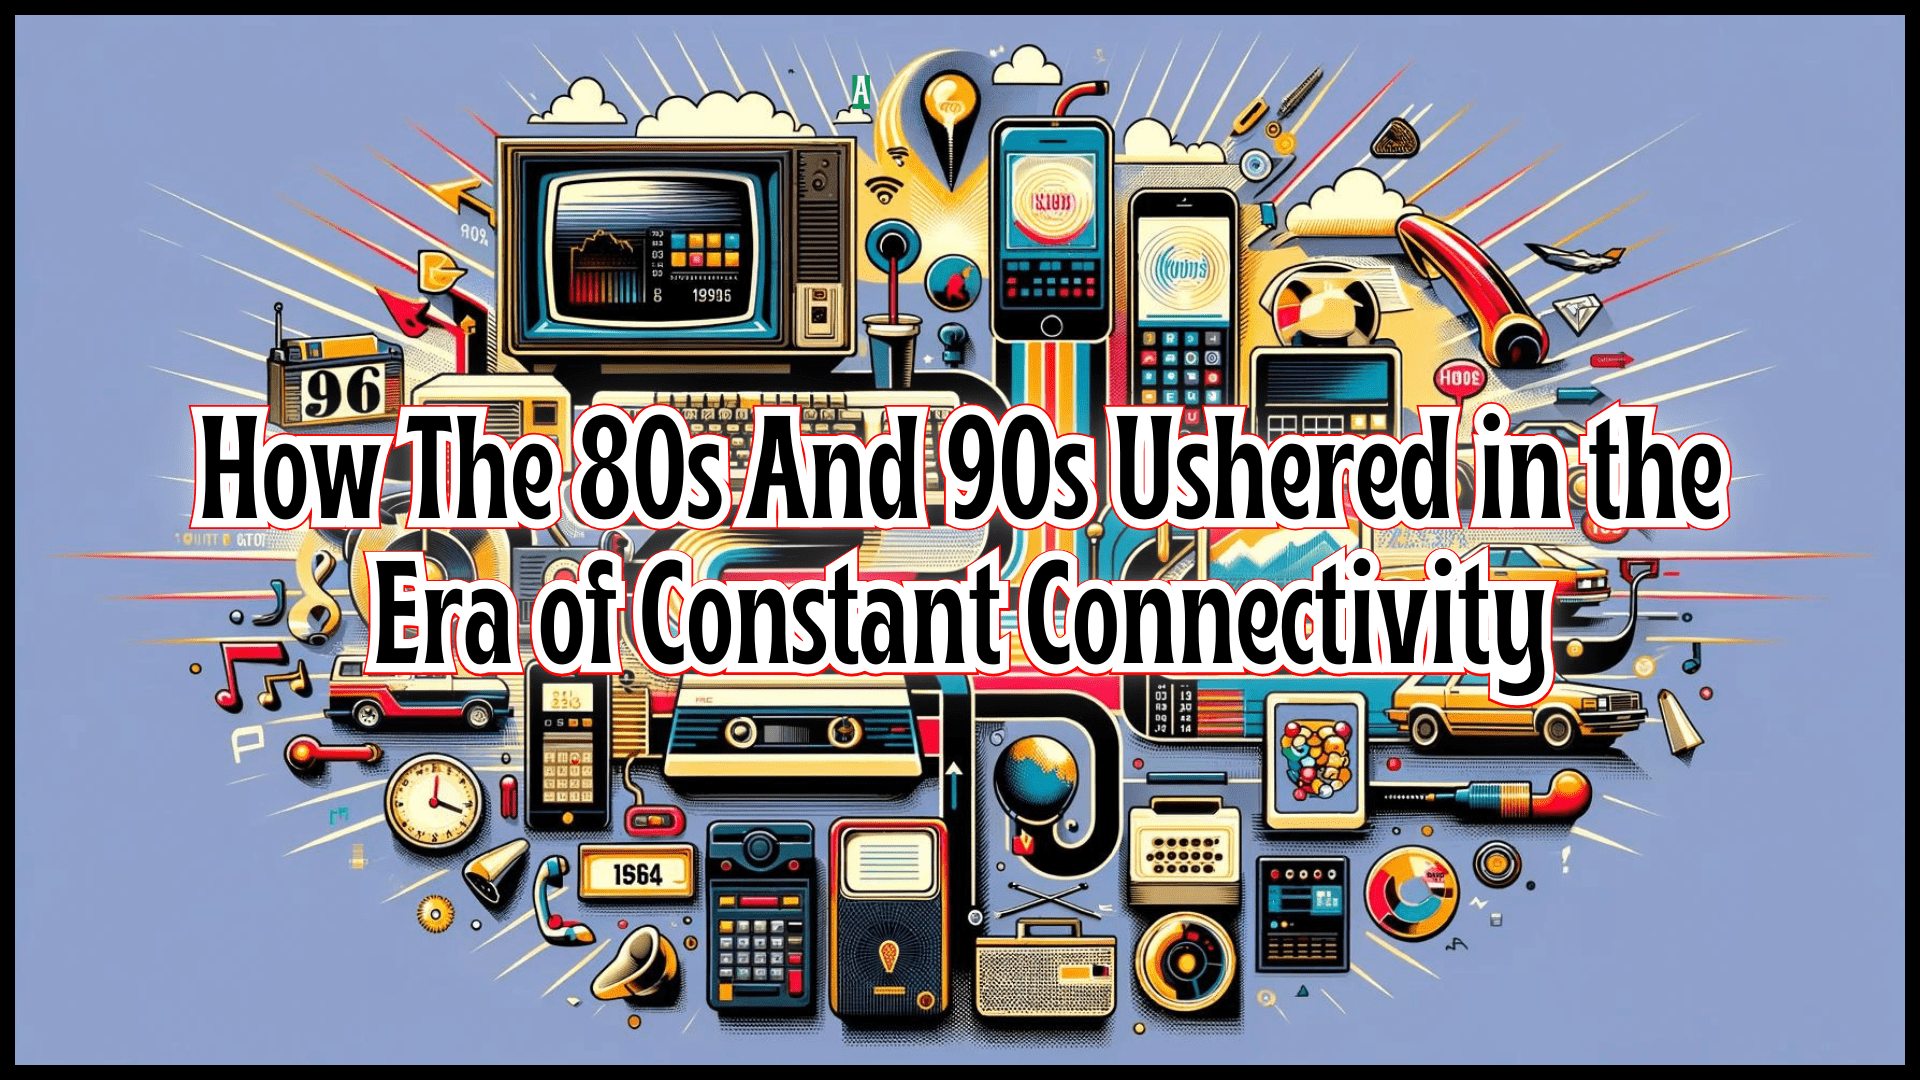 How The 80s And 90s Ushered in the Era of Constant Connectivity